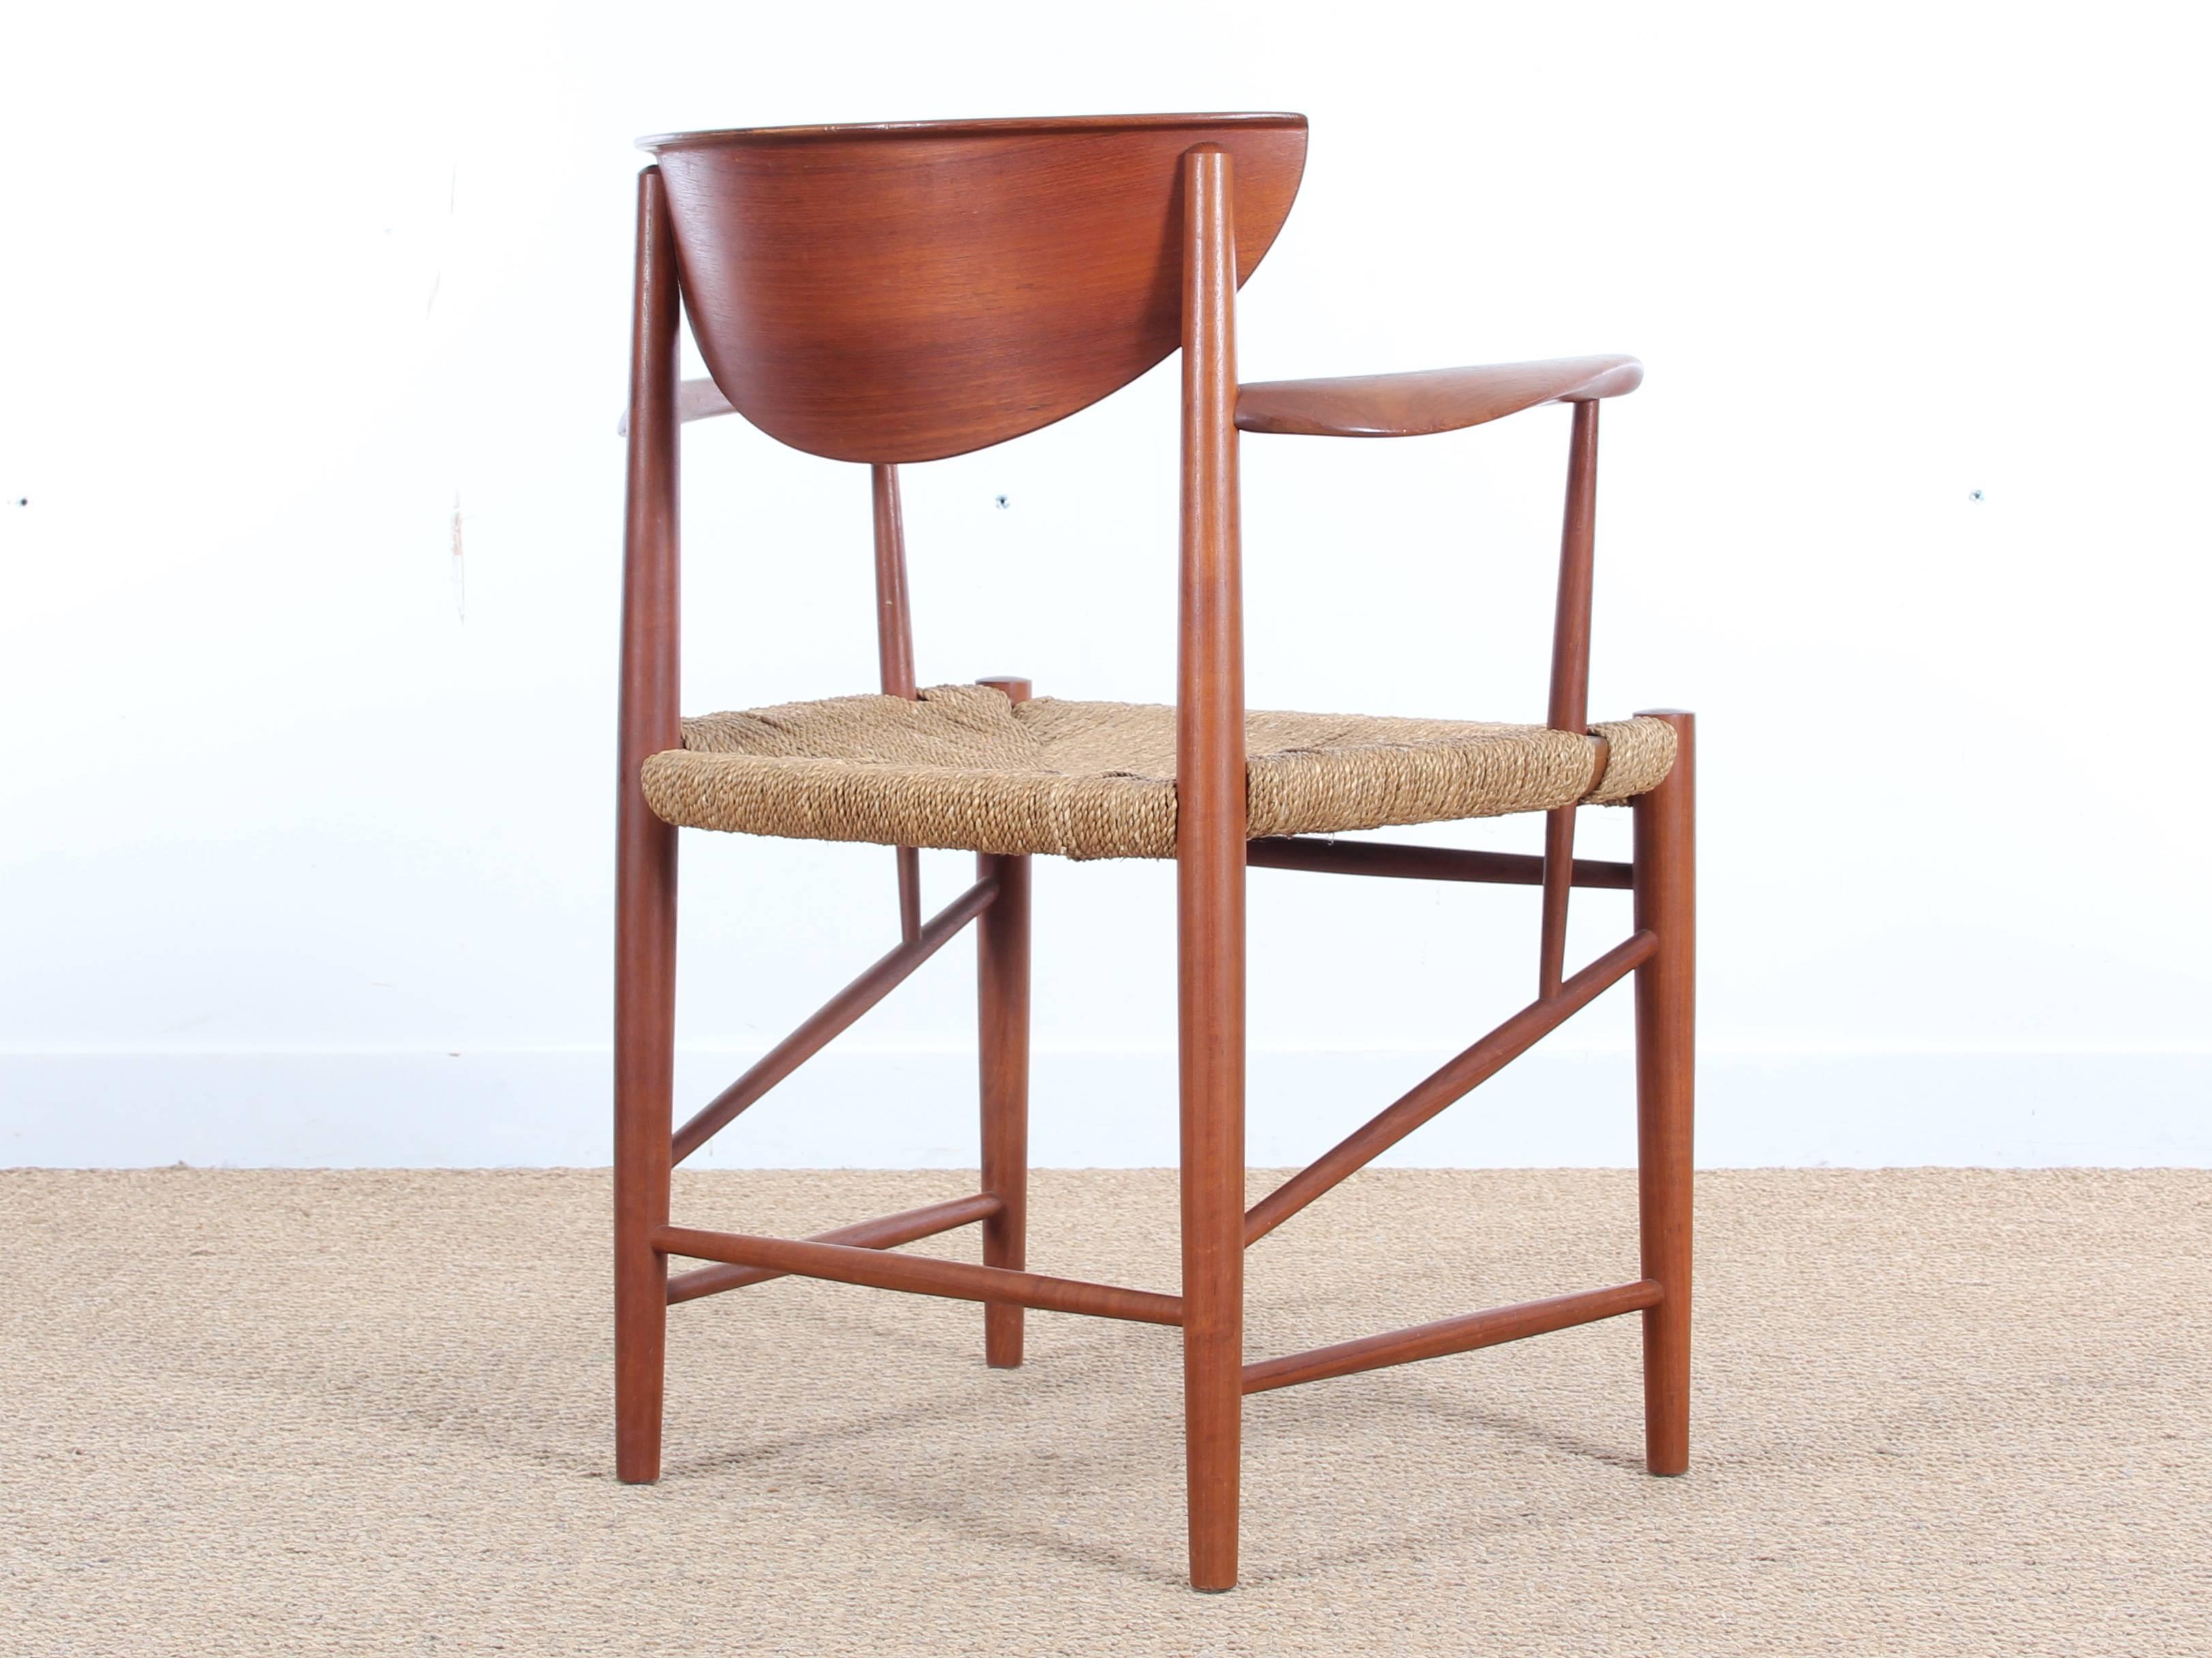 Mid-20th Century Mid-Century Modern Danish Pair of Armchairs and Set of Six Chairs in Teak